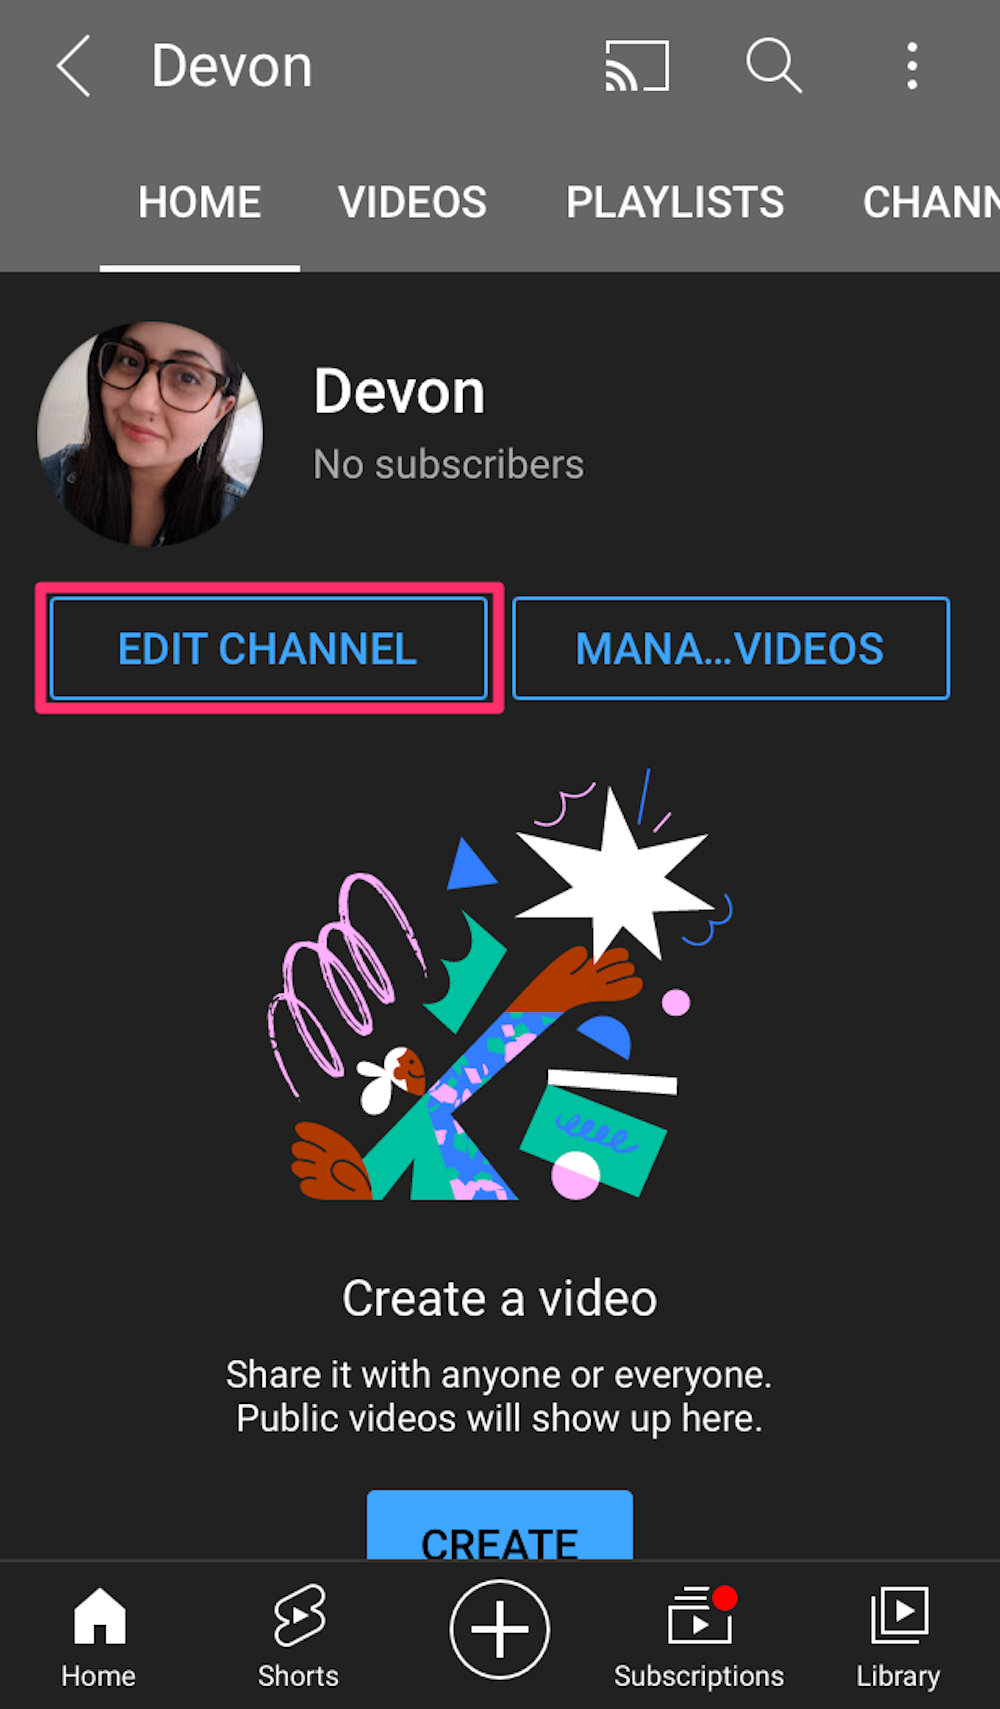 Screenshot of "Edit channel" button on YouTube app